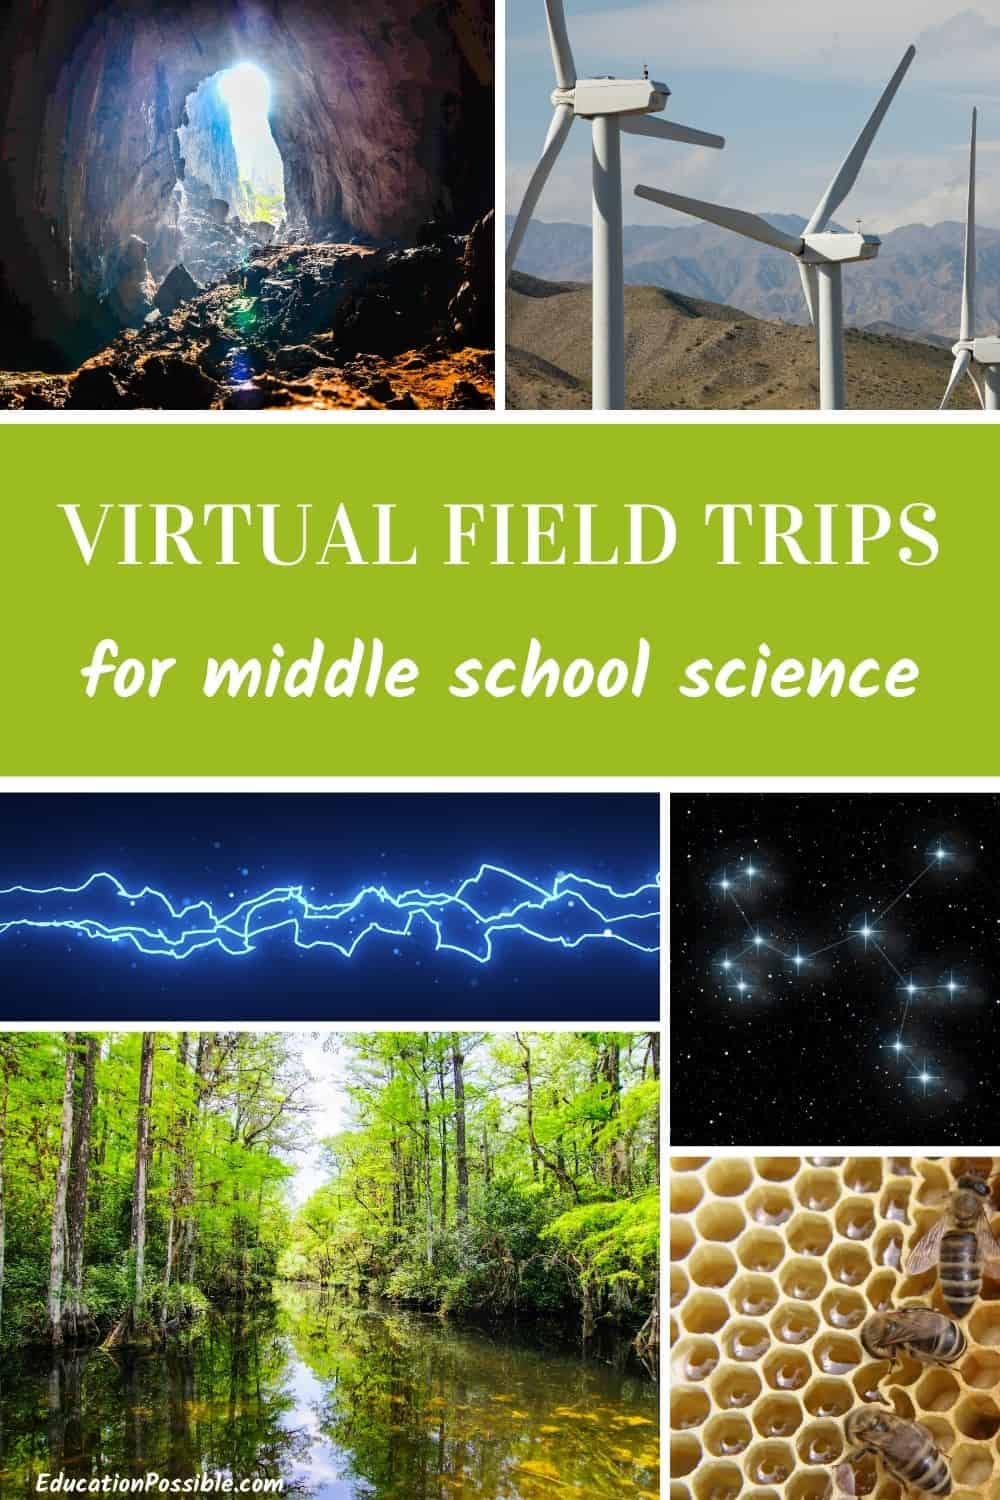 Engaging Virtual Field Trips for Middle School Science